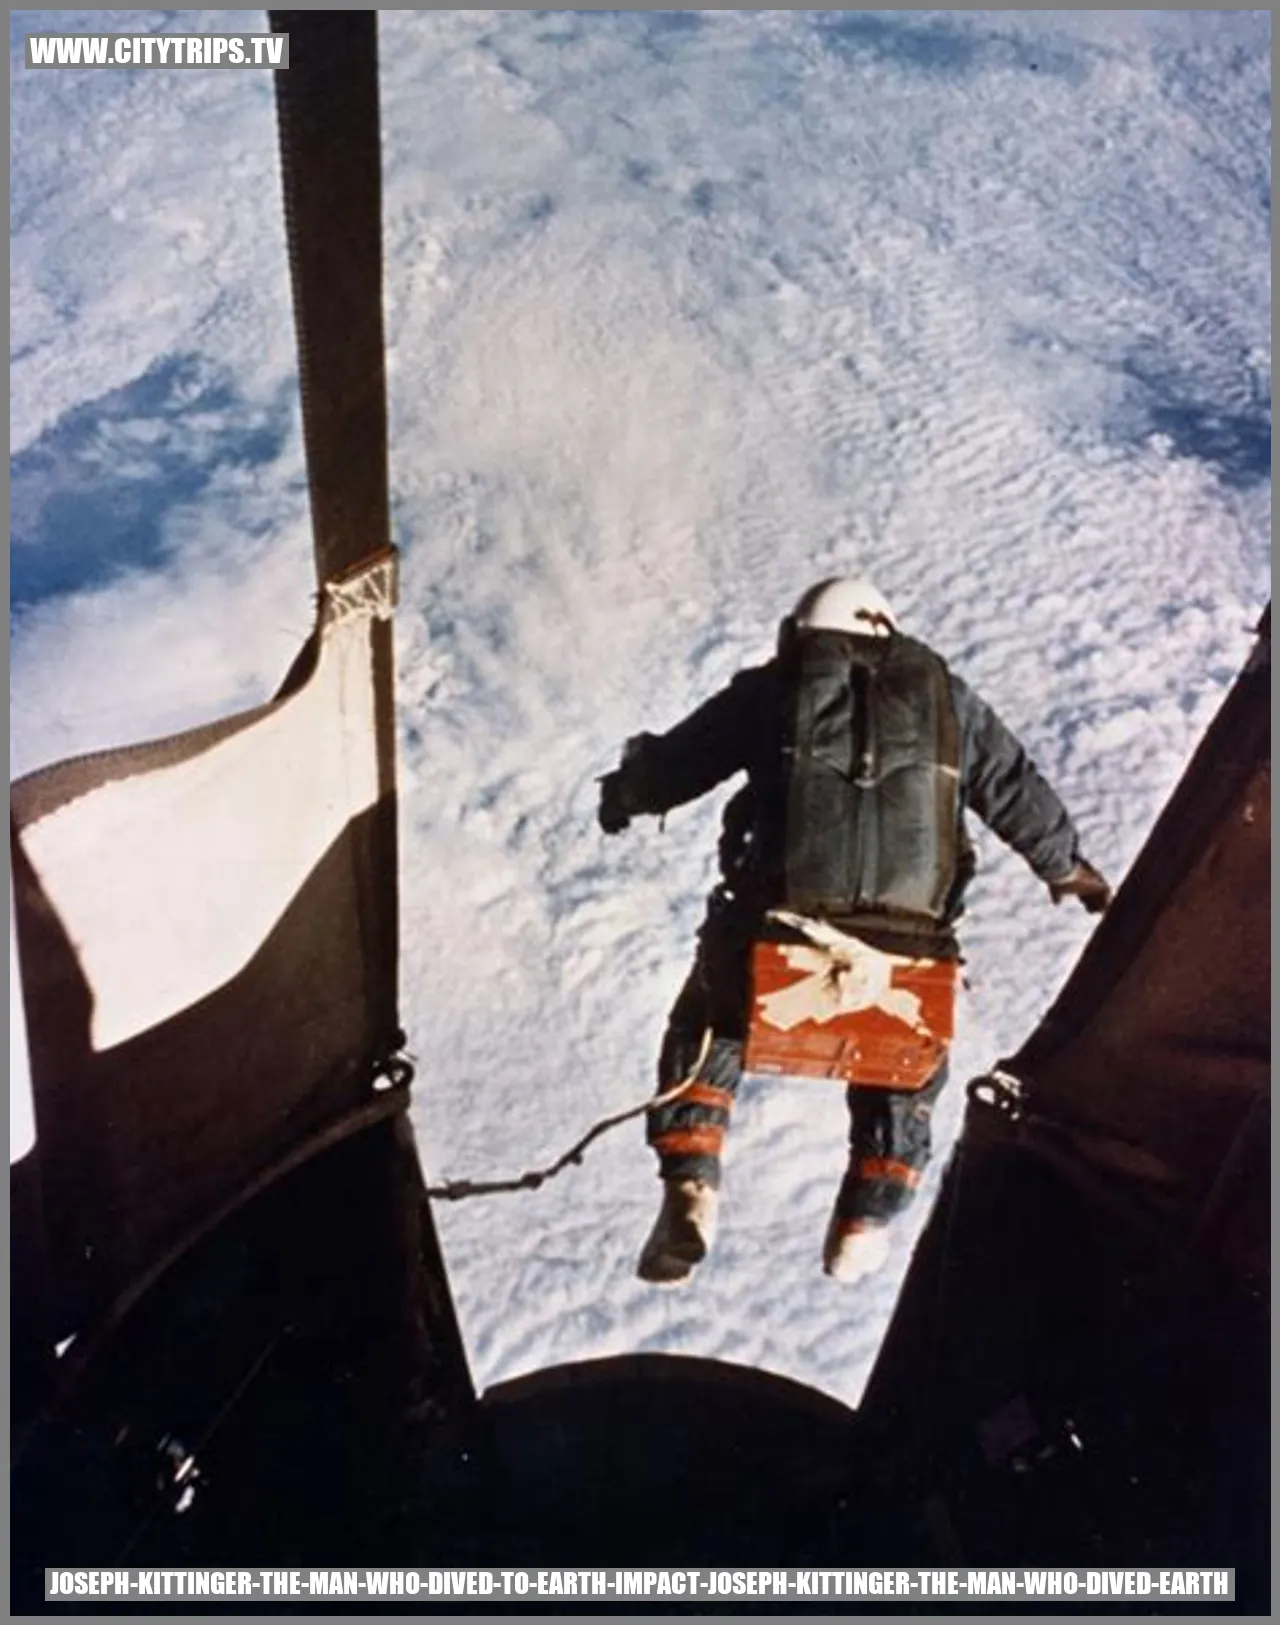 Joseph Kittinger: The Man Who Dived to Earth - Impact